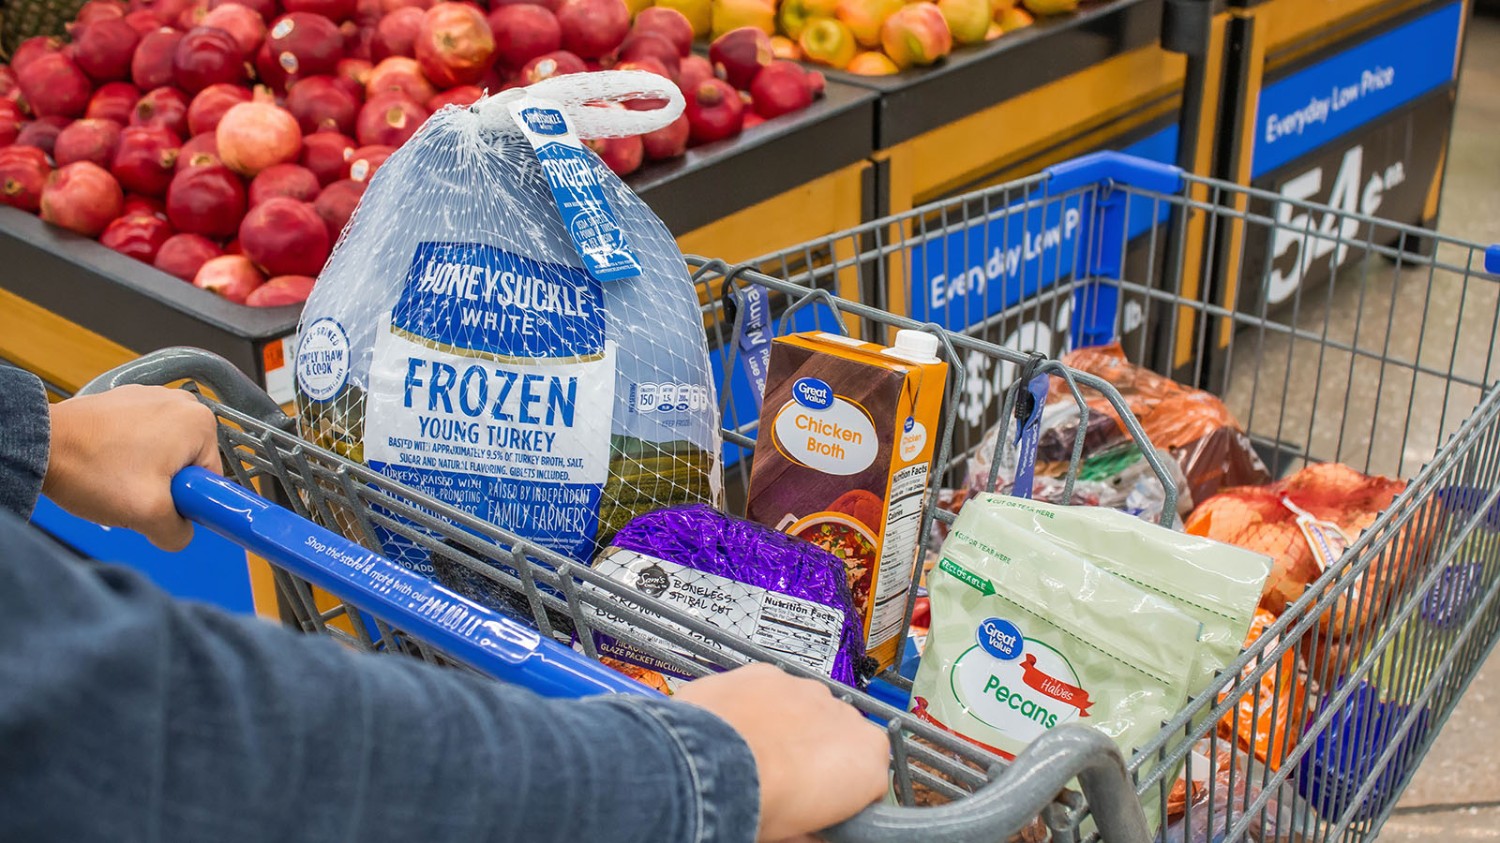 Walmart is making a major change to store size and customers will  immediately notice the difference